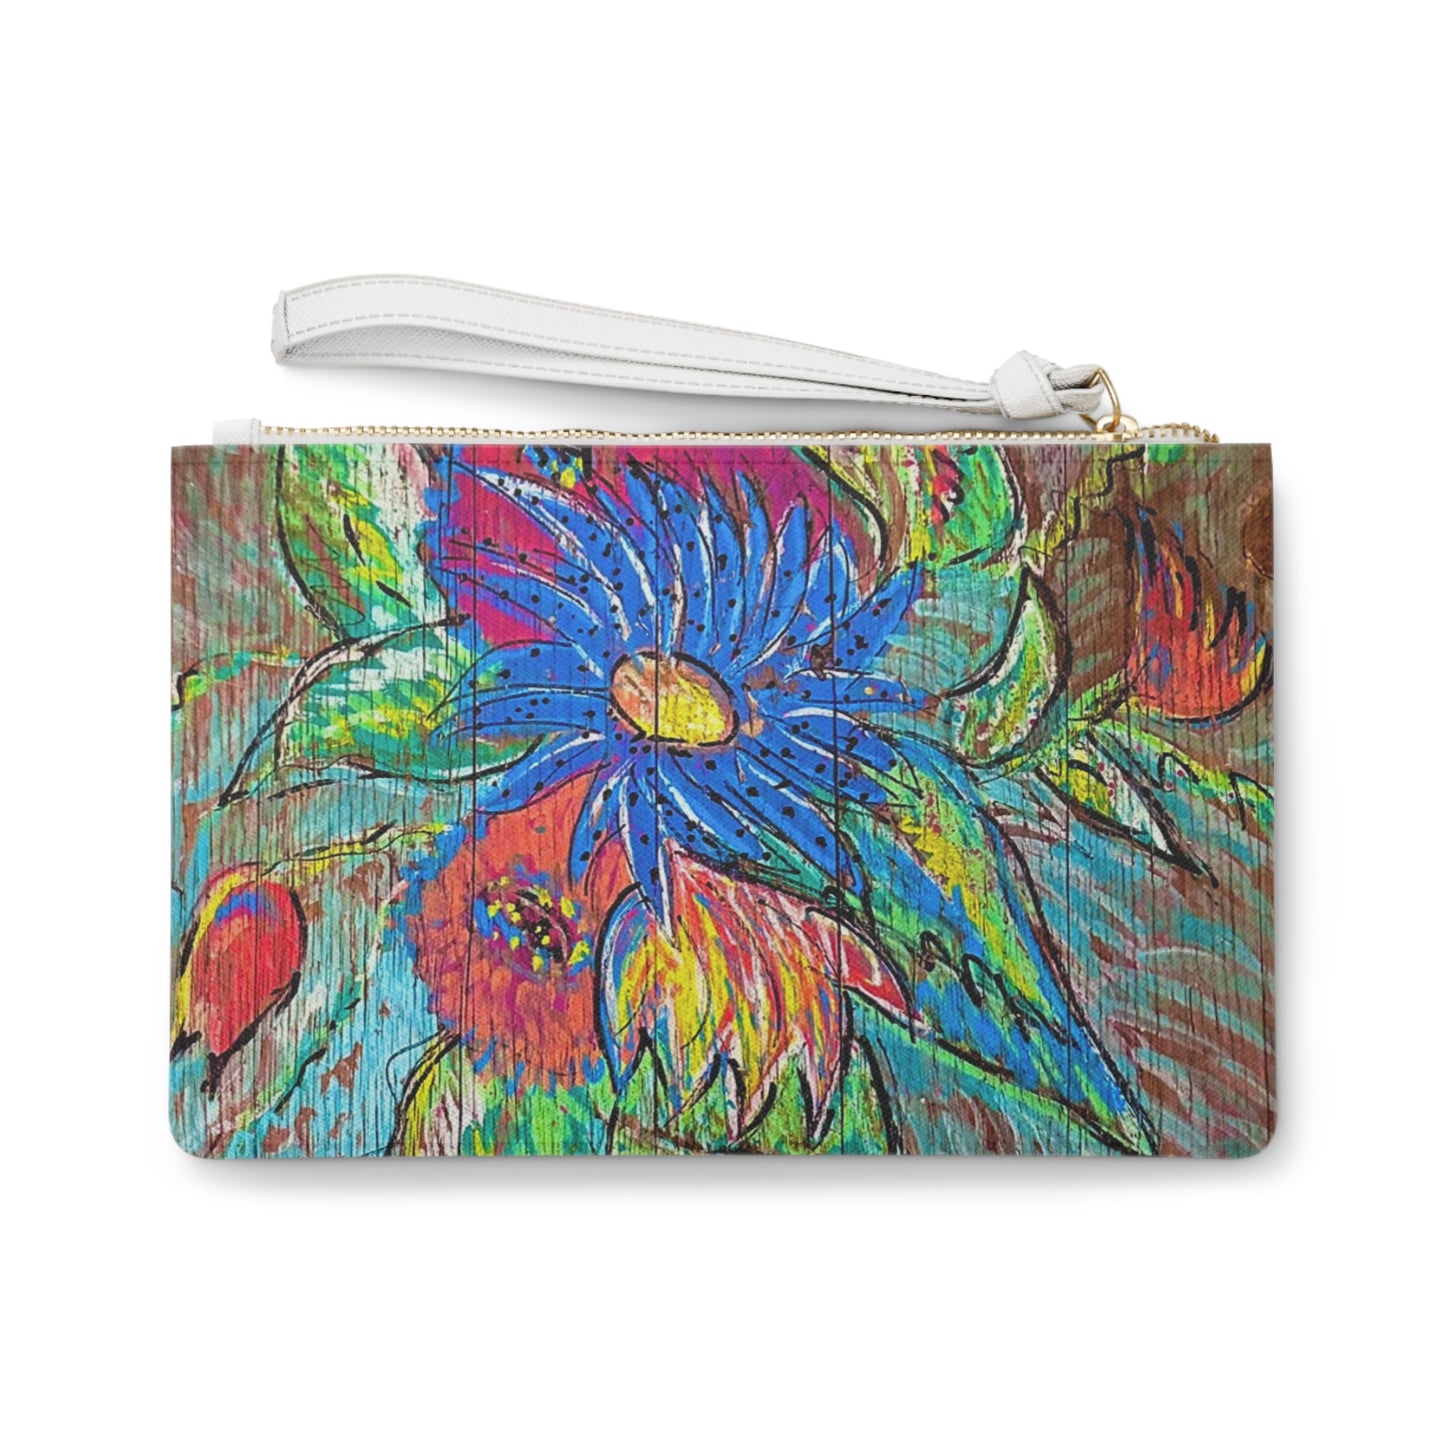 Rustic Wood Floral Painting Makeup Errand Evening Pouch Clutch Bag